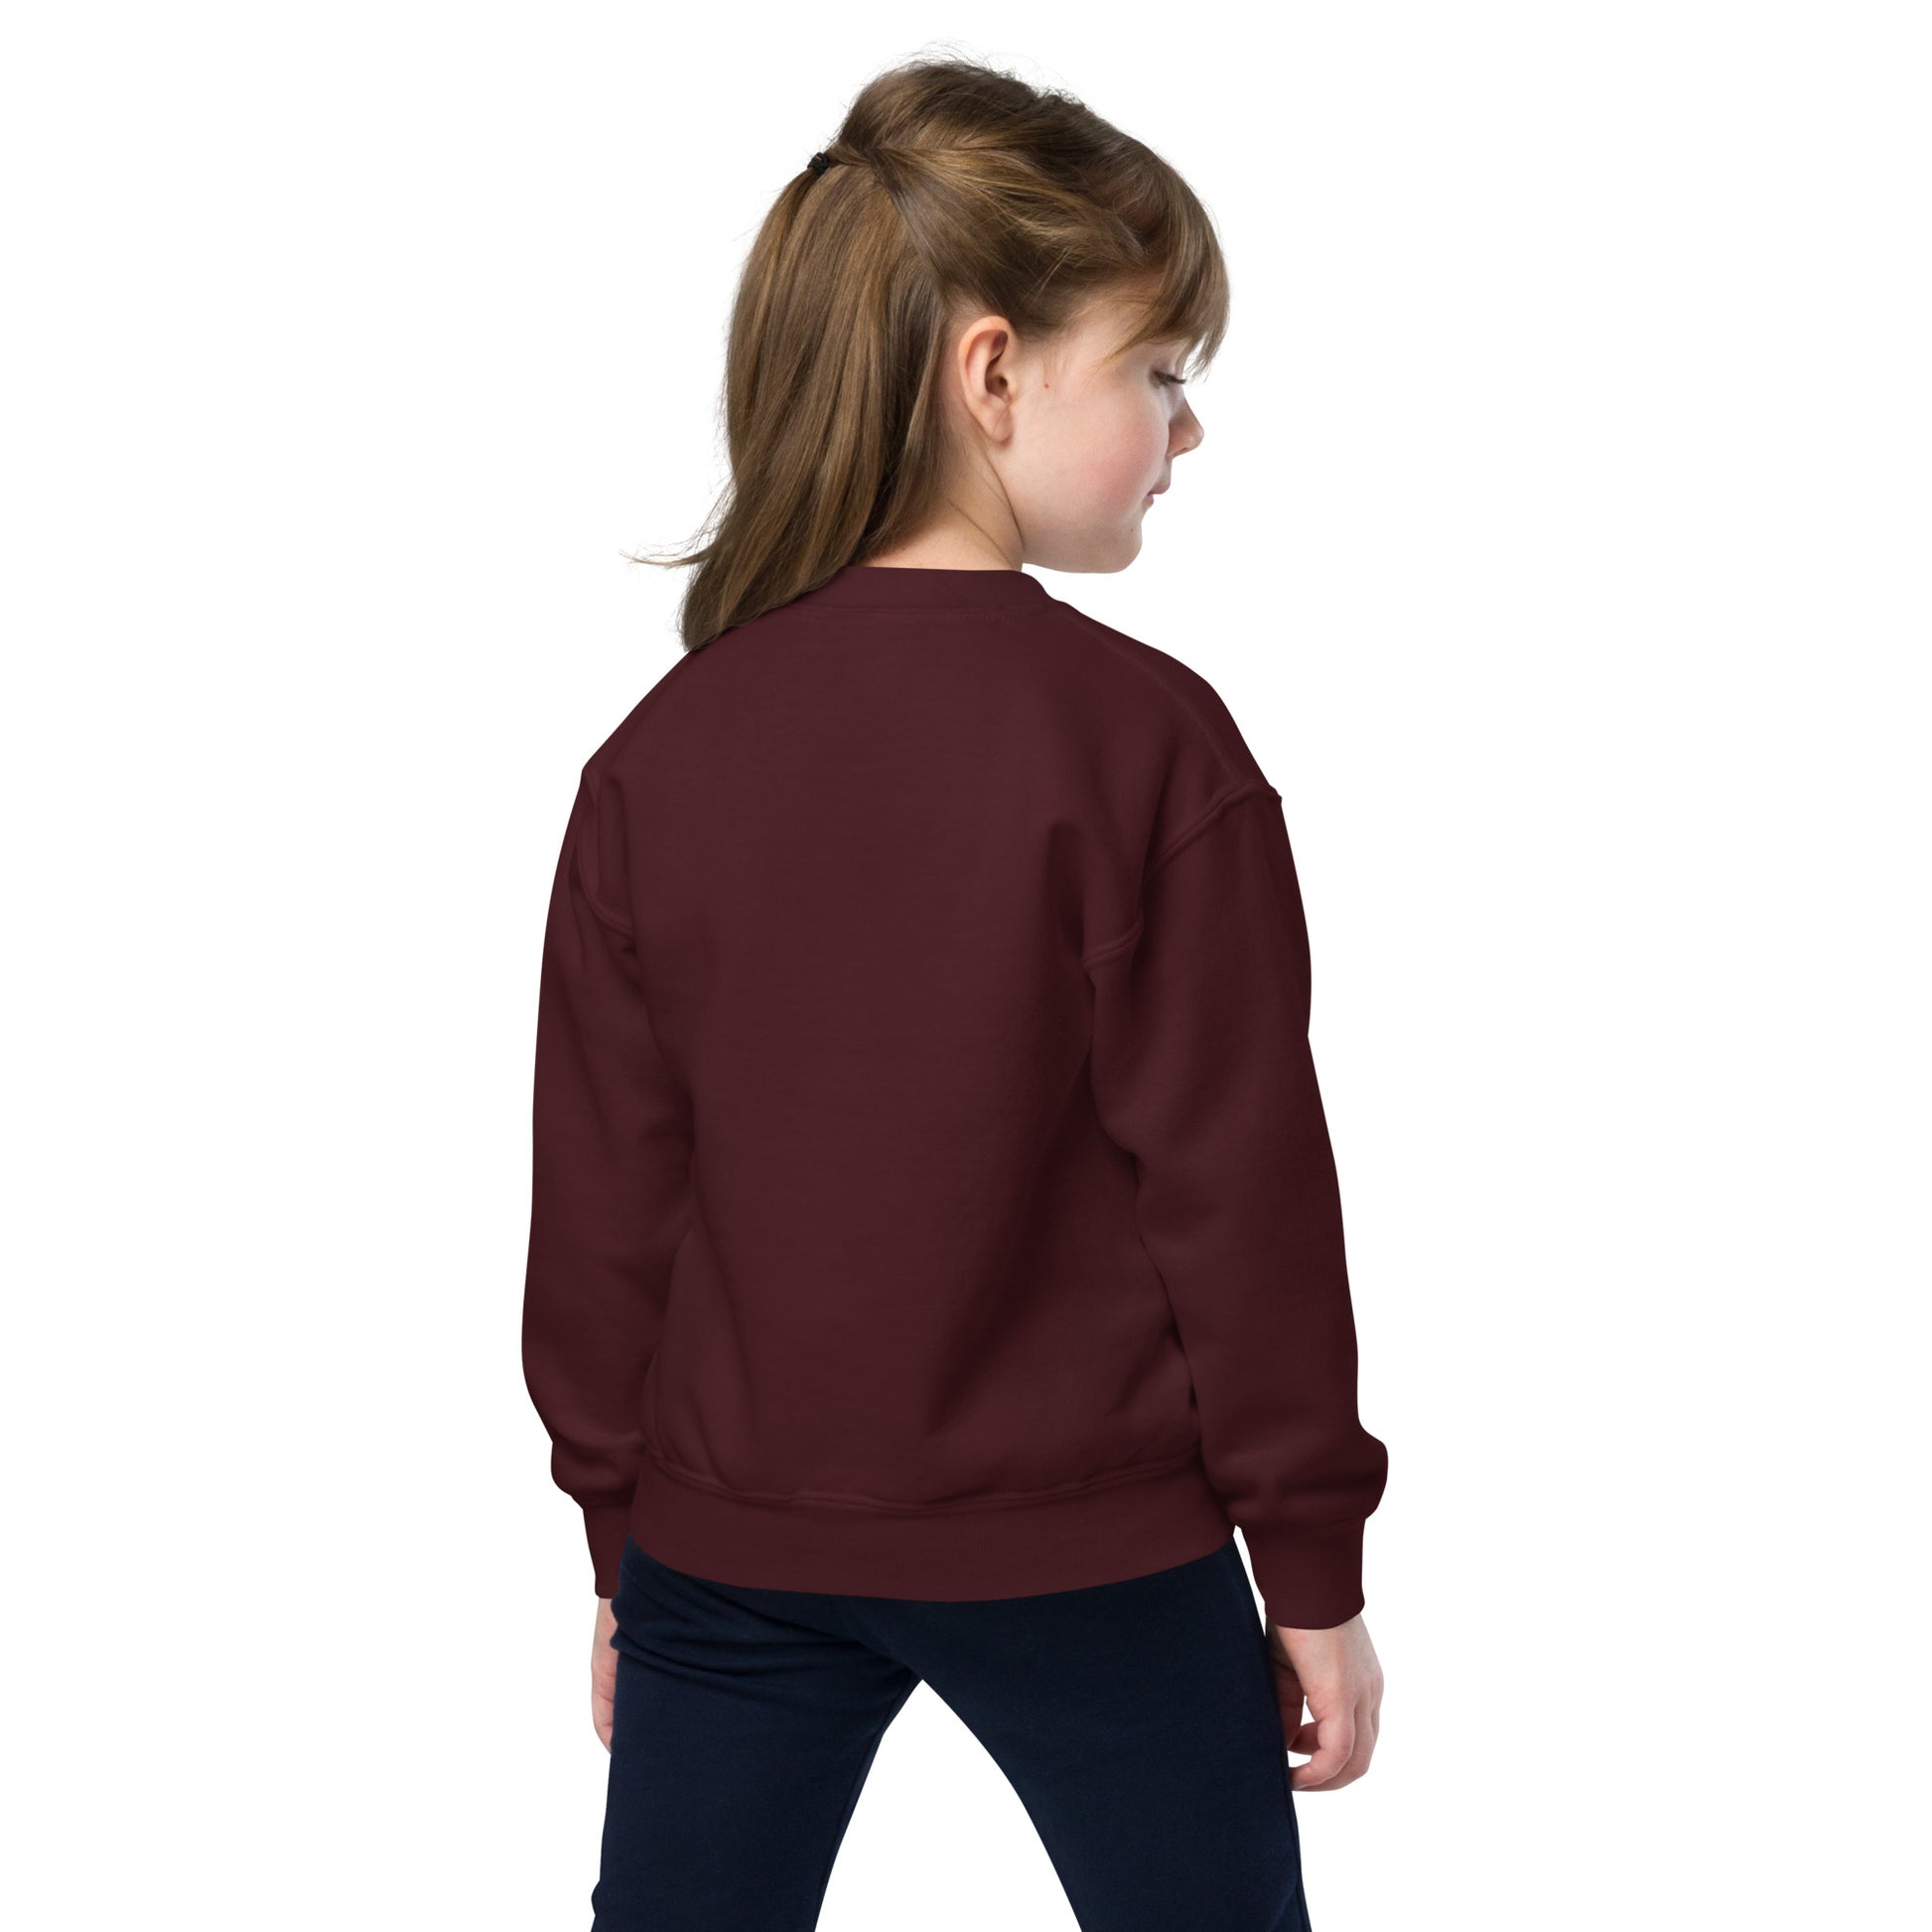 a young girl wearing a maroon sweatshirt and black pants